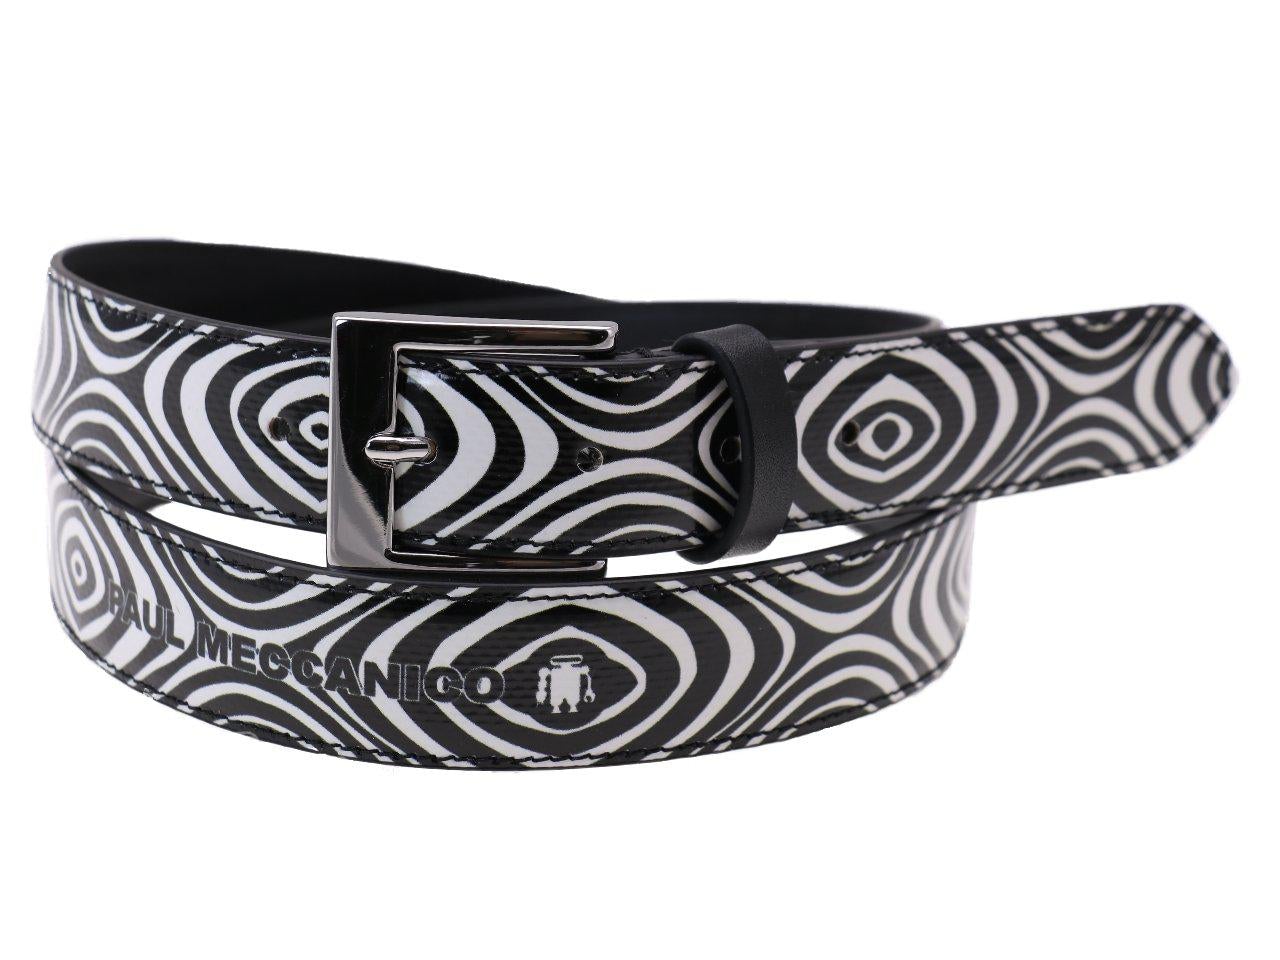 WOMAN'S BELT BLACK AND WHITE COLOURS OPTICAL FANTASY MADE OF LORRY TARPAULIN - Unique Pieces Paul Meccanico